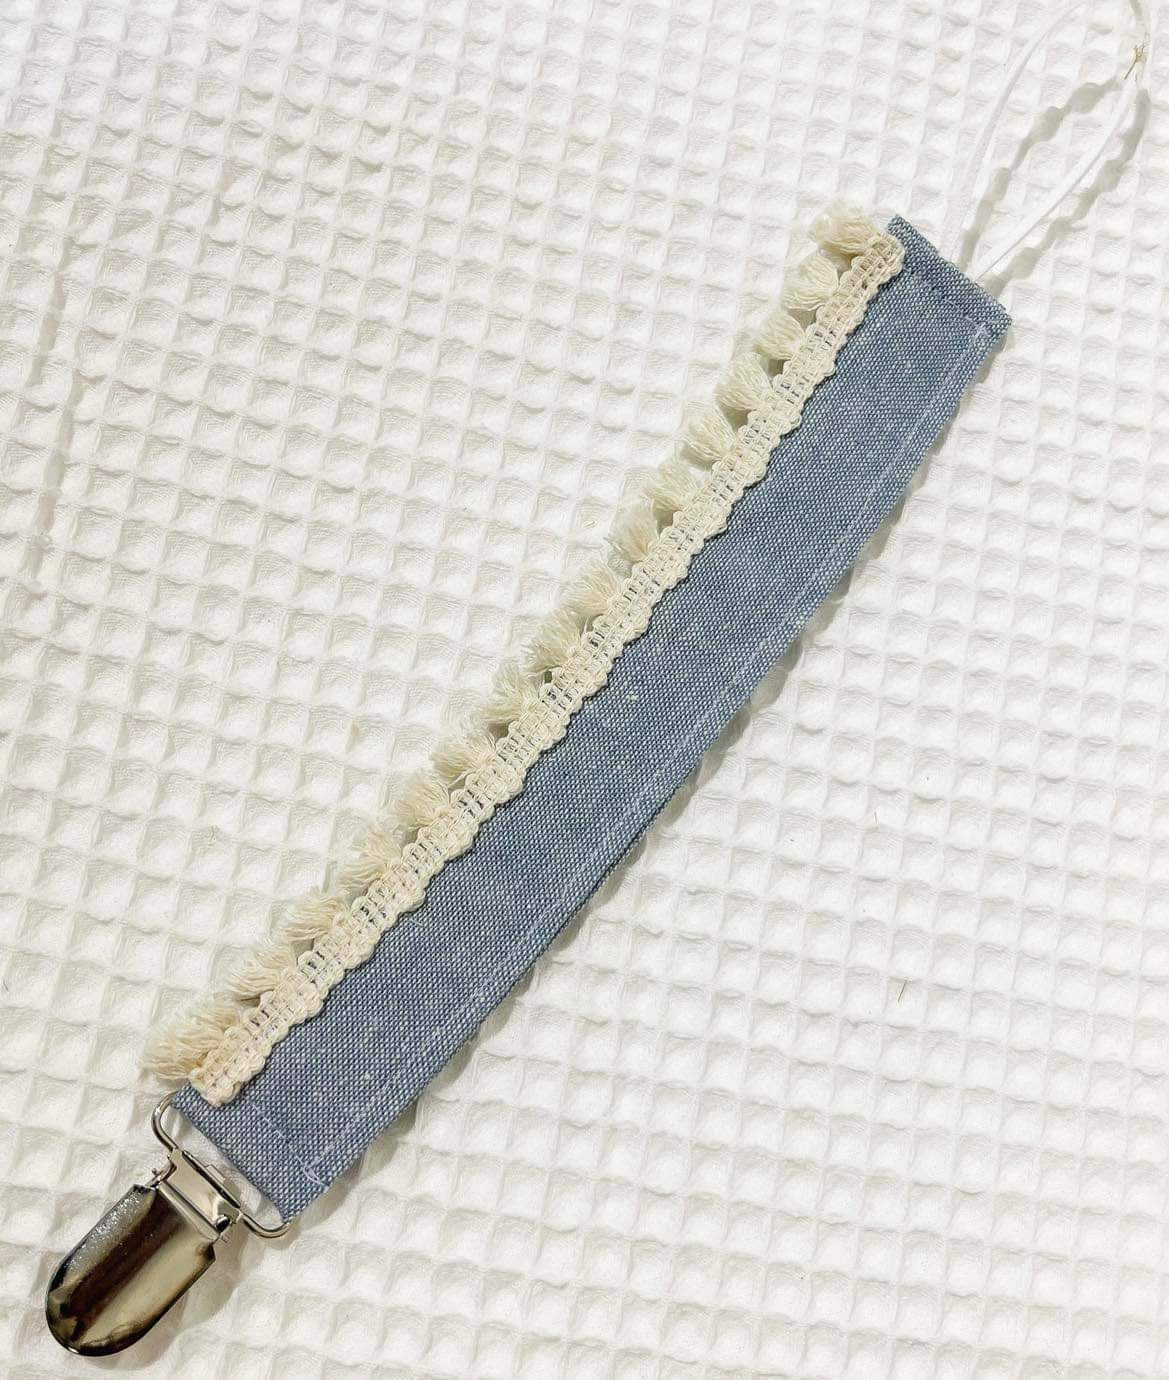 Fabric pacifier clip